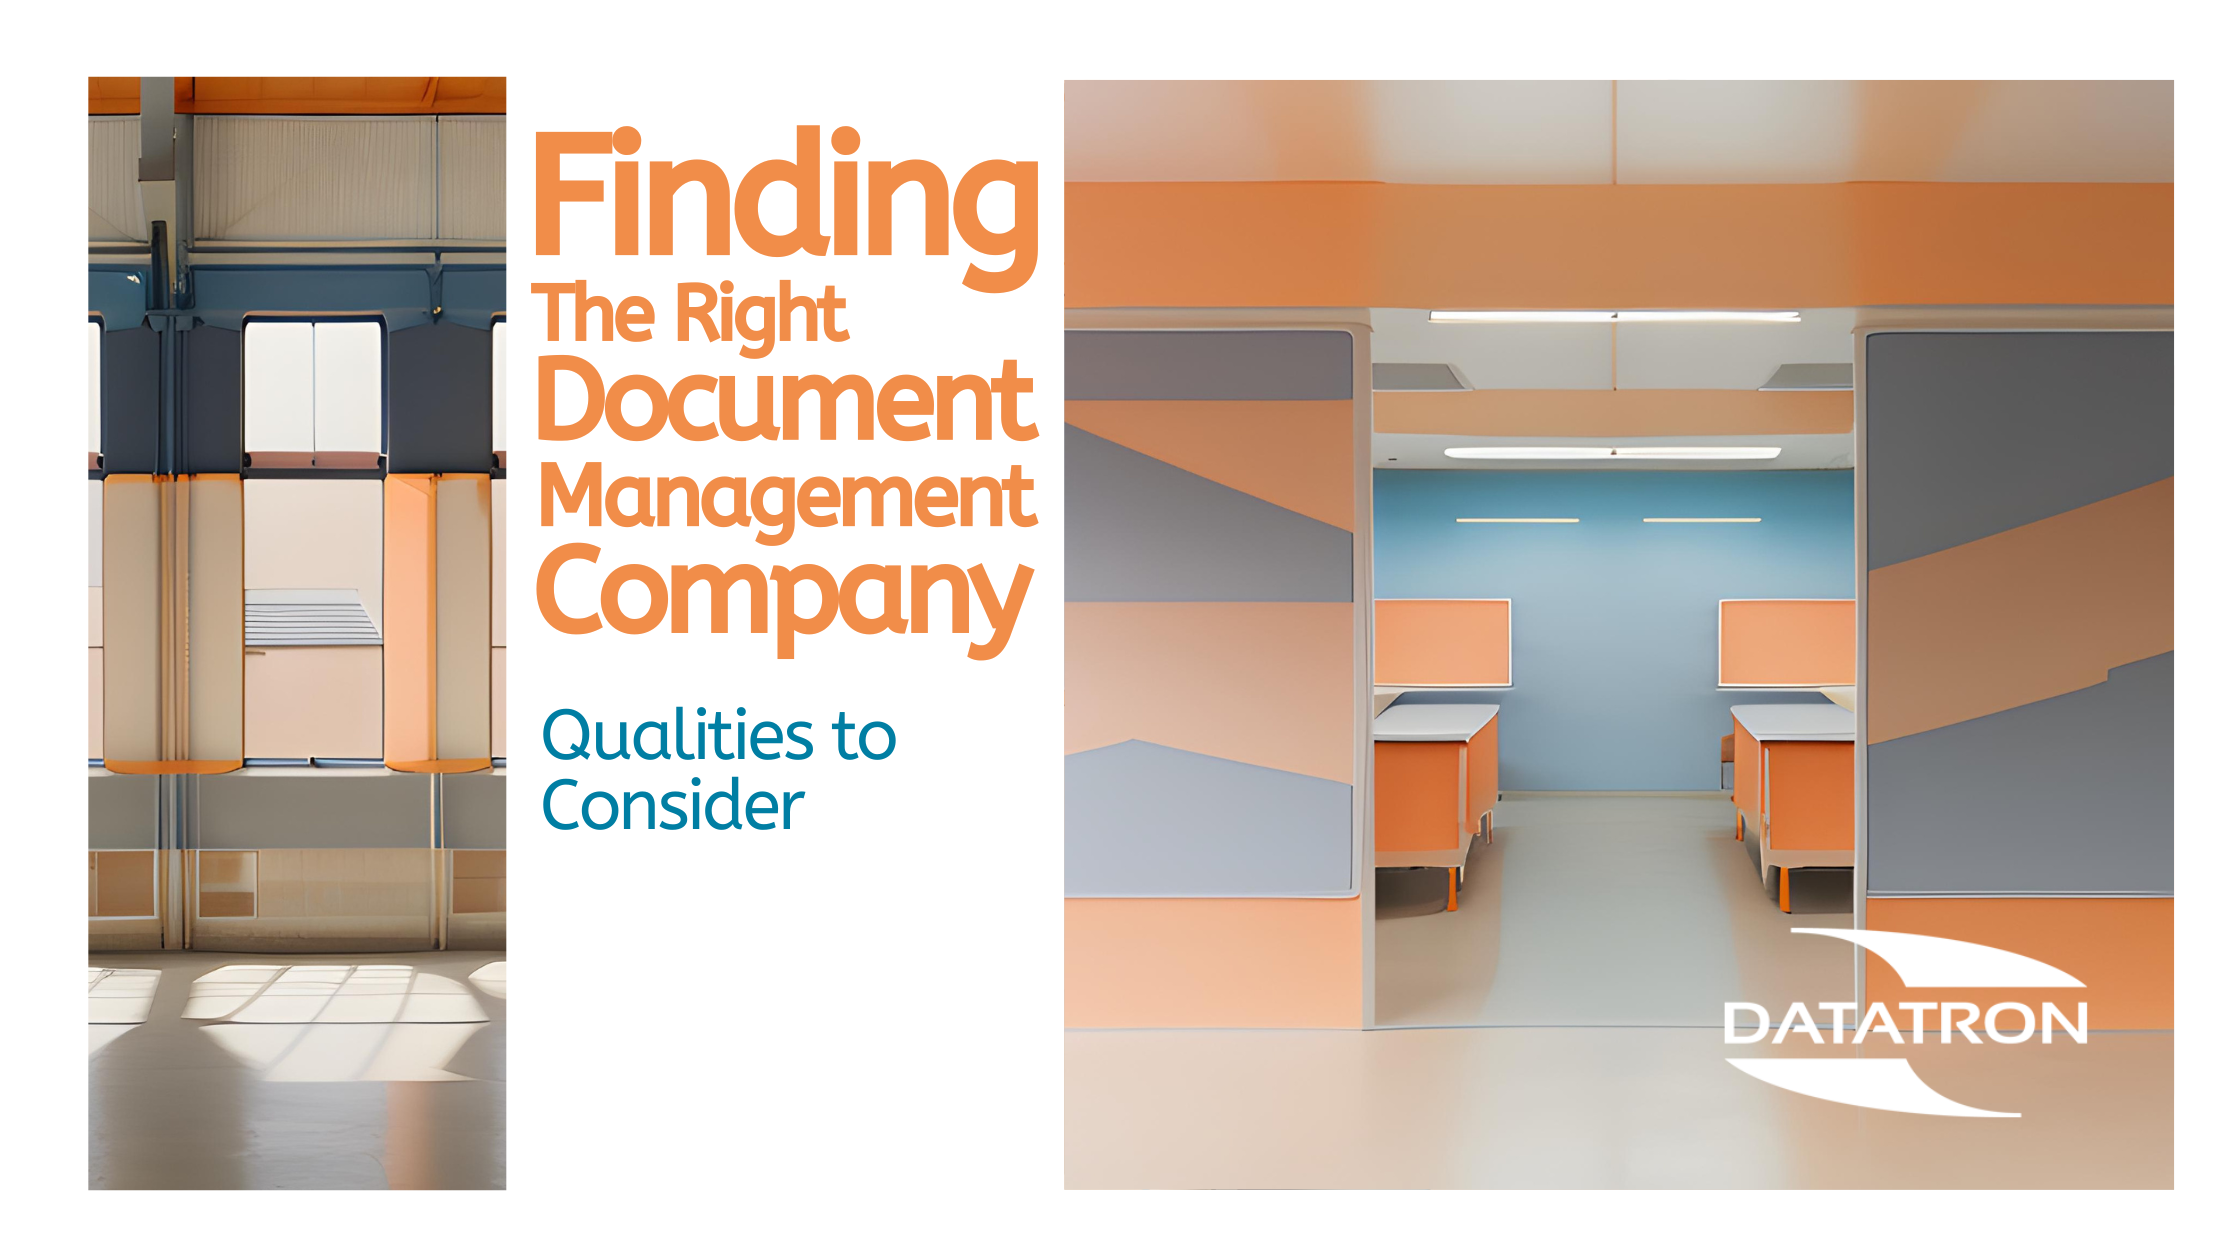 Finding the right document management company